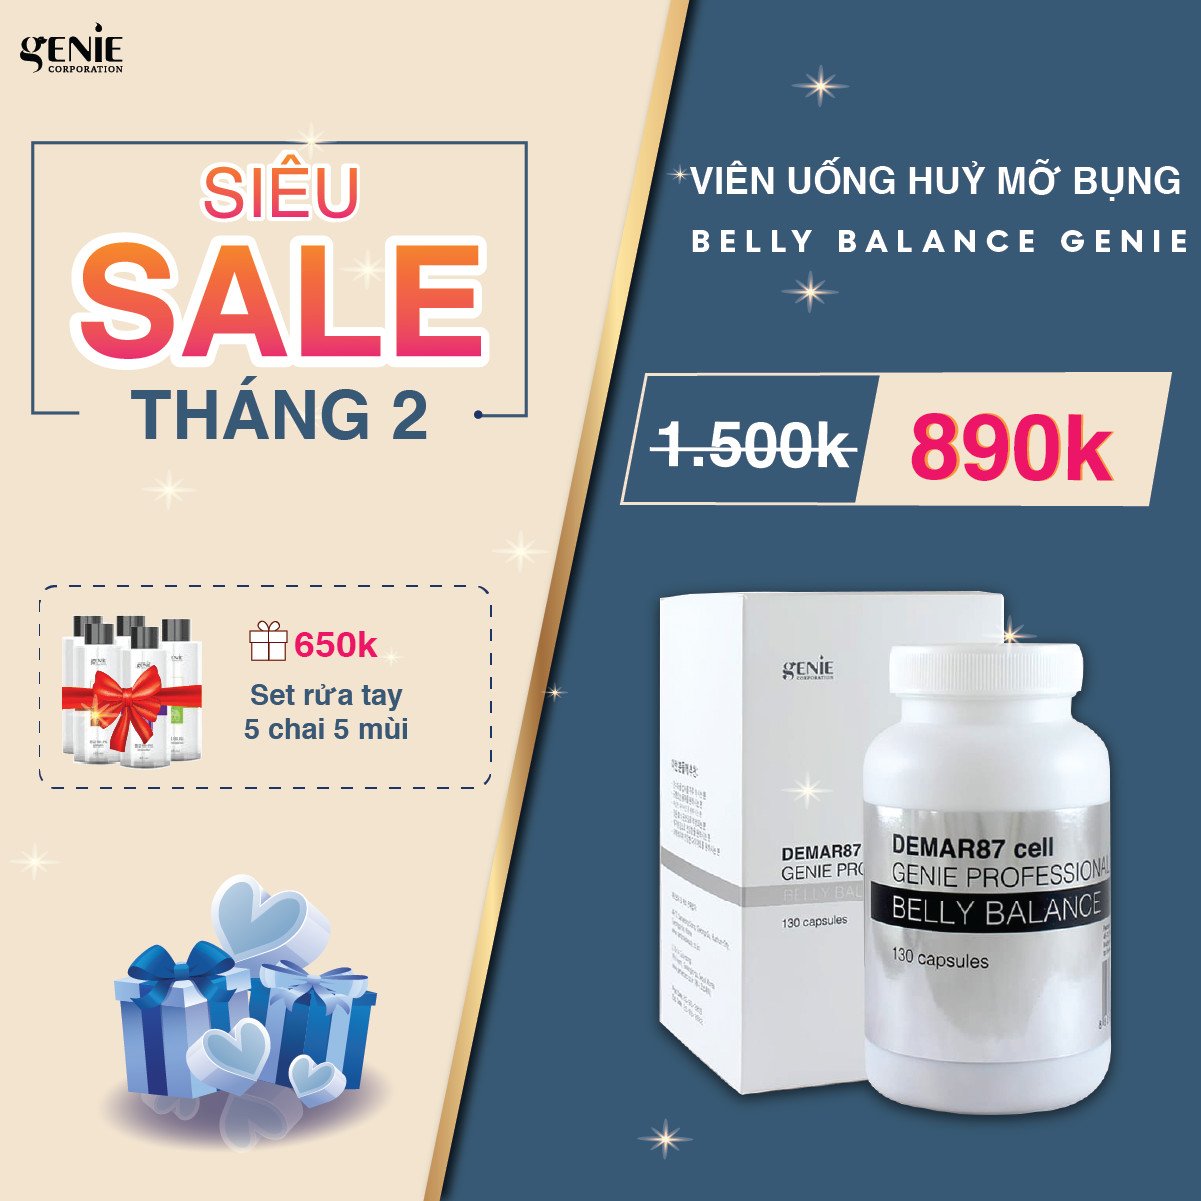 sale thang 2 9 geniecorp.vn